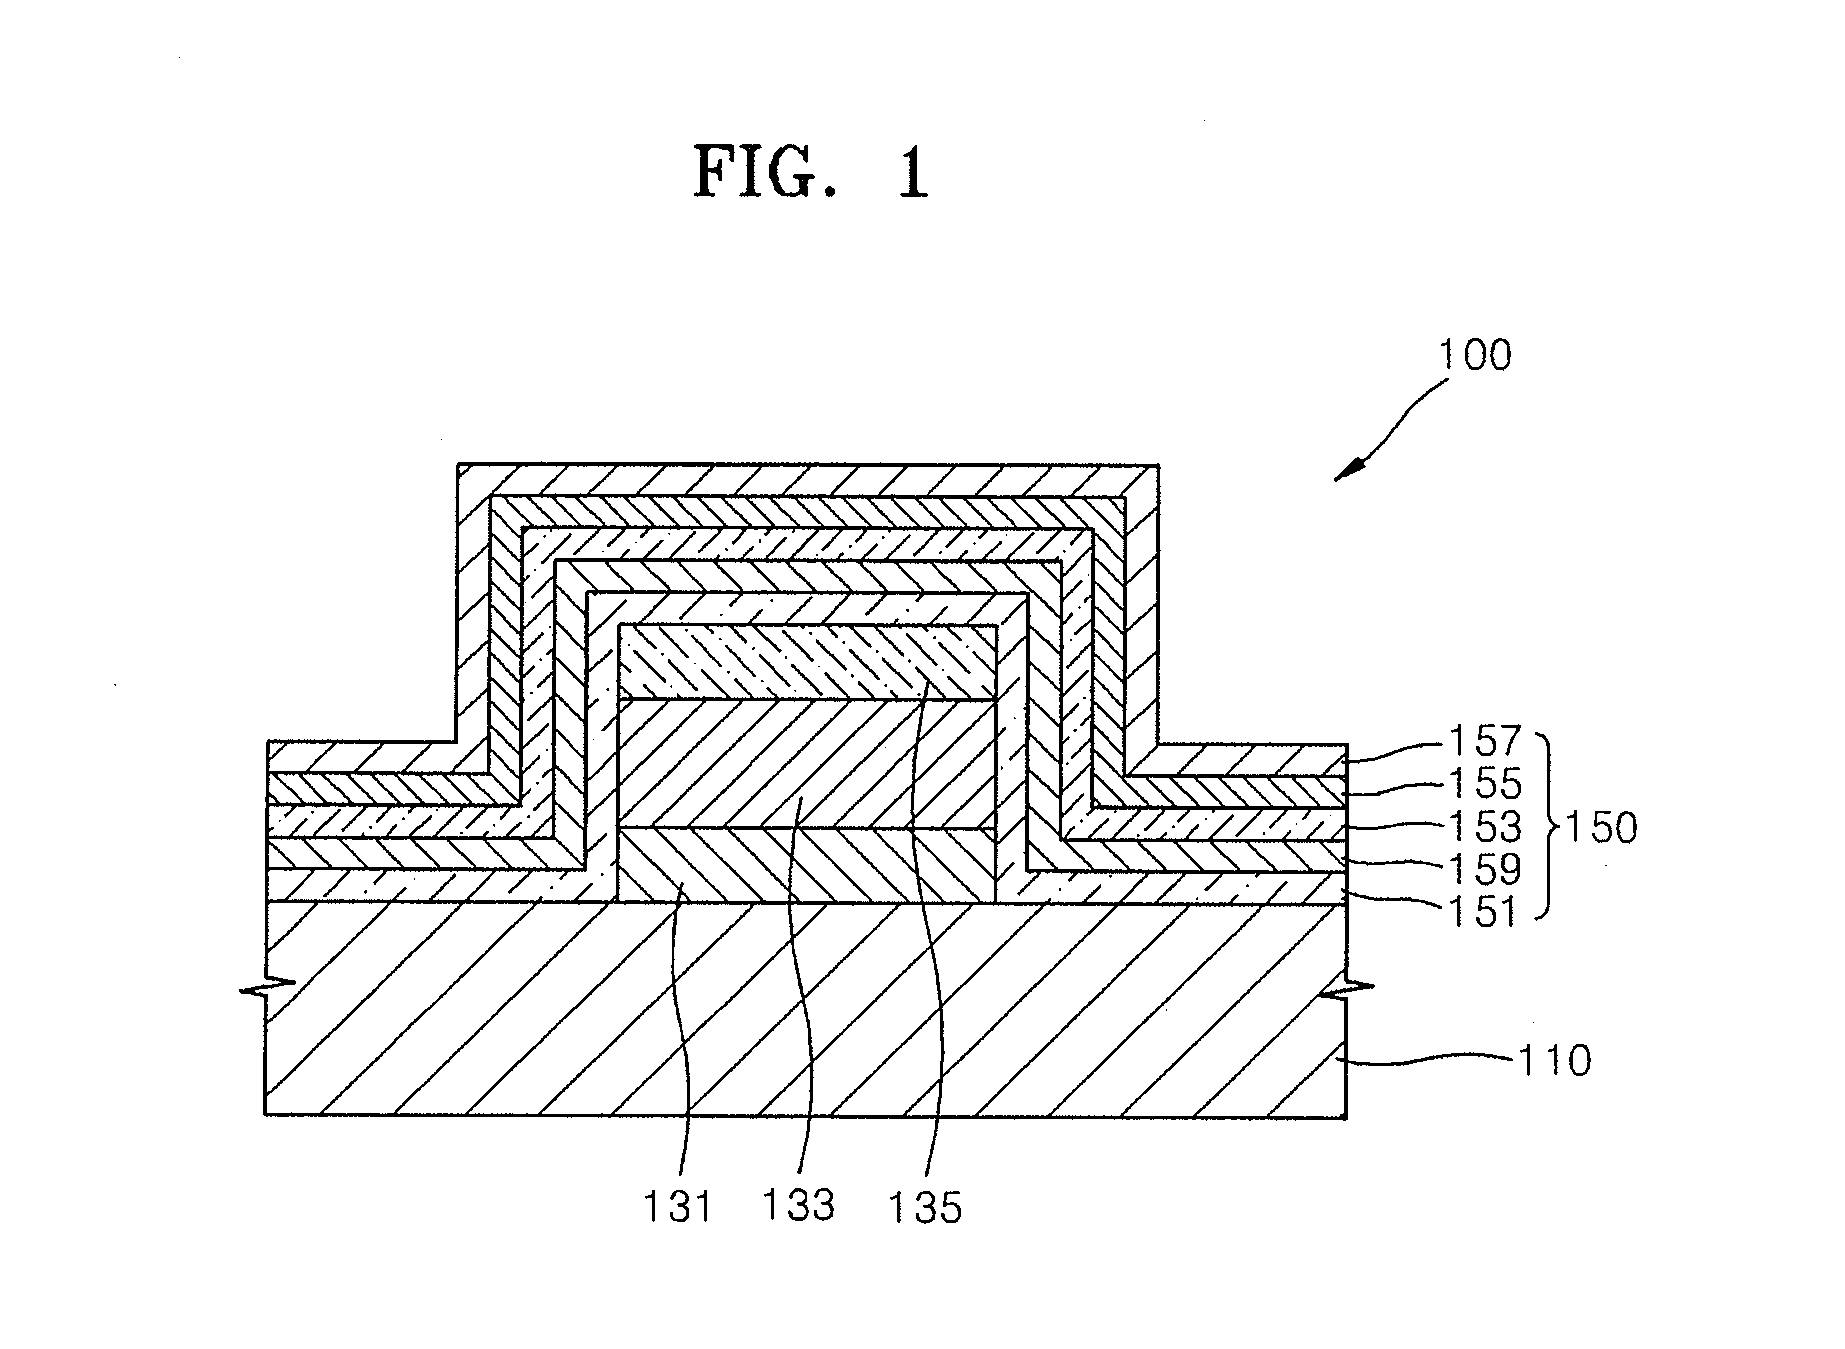 Organic light-emitting display apparatus having a hydroxyquinoline-based layer as part of the sealing structure and method of manufacturing the same